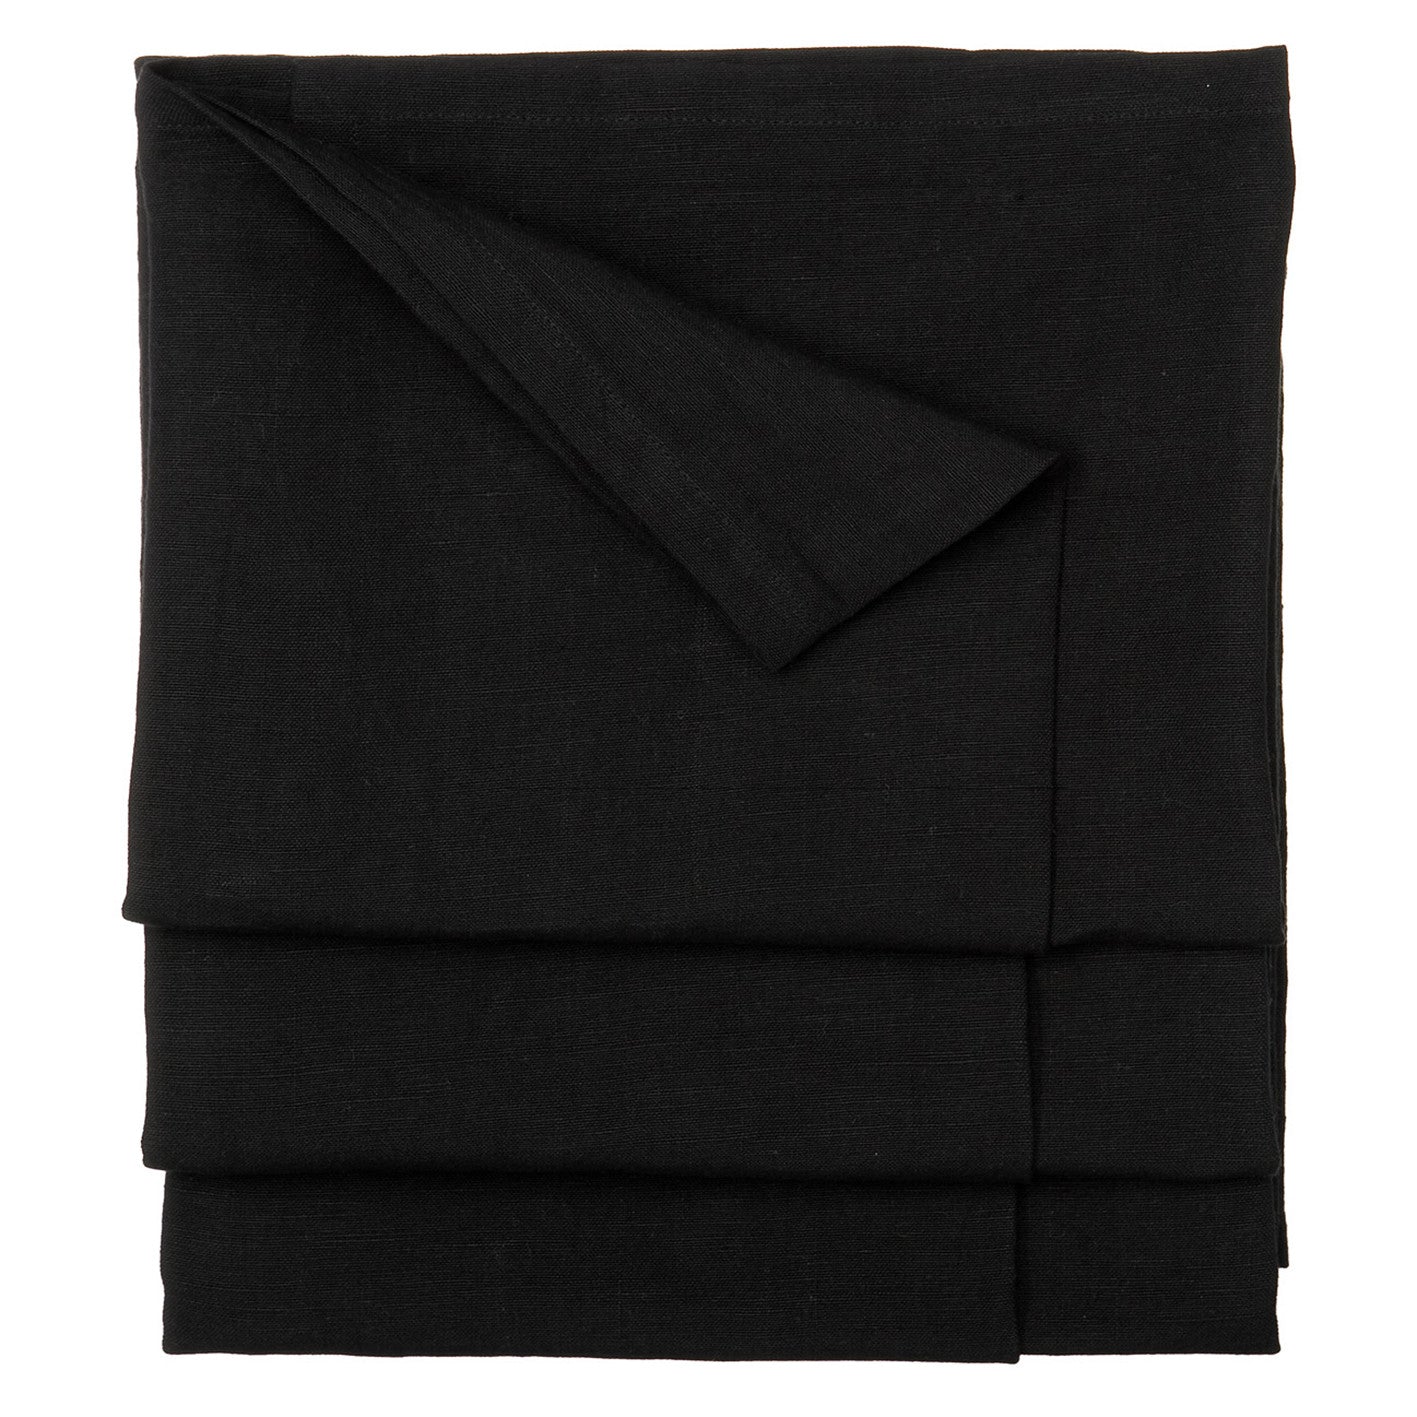 Solid Dyed Linen Cotton Union Tablecloth in Black Ships from Canada (USA)